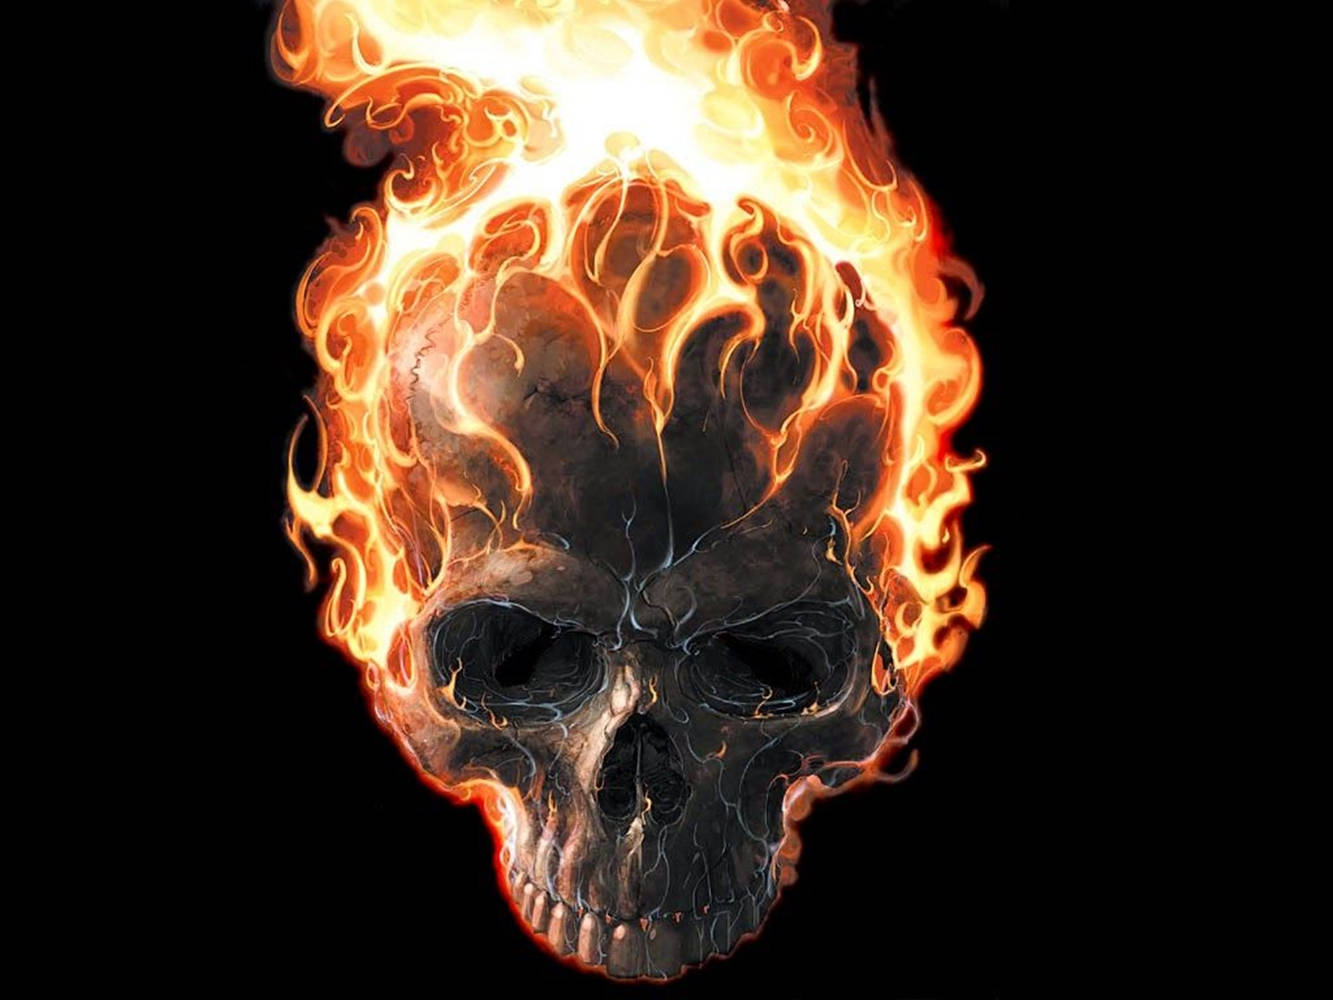 Cool 3d Ghost Skull On Fire